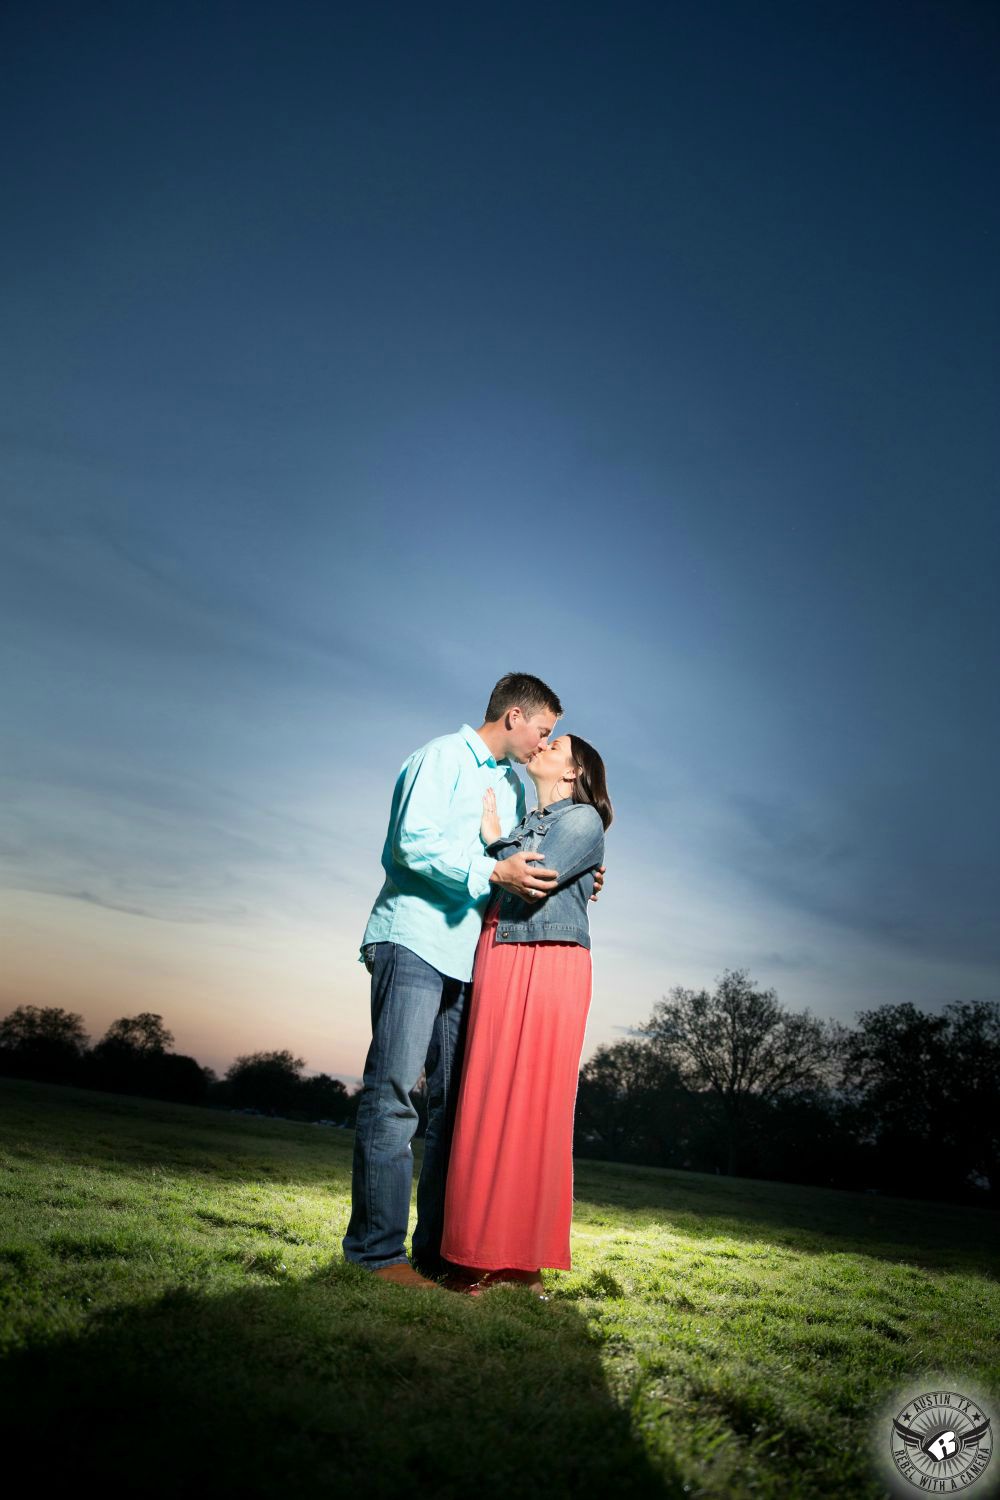 Brunette tan girl wearing a long pink dress in a denim jacket kisses a taller guy with dark hair and a light blue long sleeve button up shirt and blue jeans standing in a green grassy field at dusk with a big blue and orange Texas sky in the background of this enchanting engagement photo at Zilker Park in Austin. 